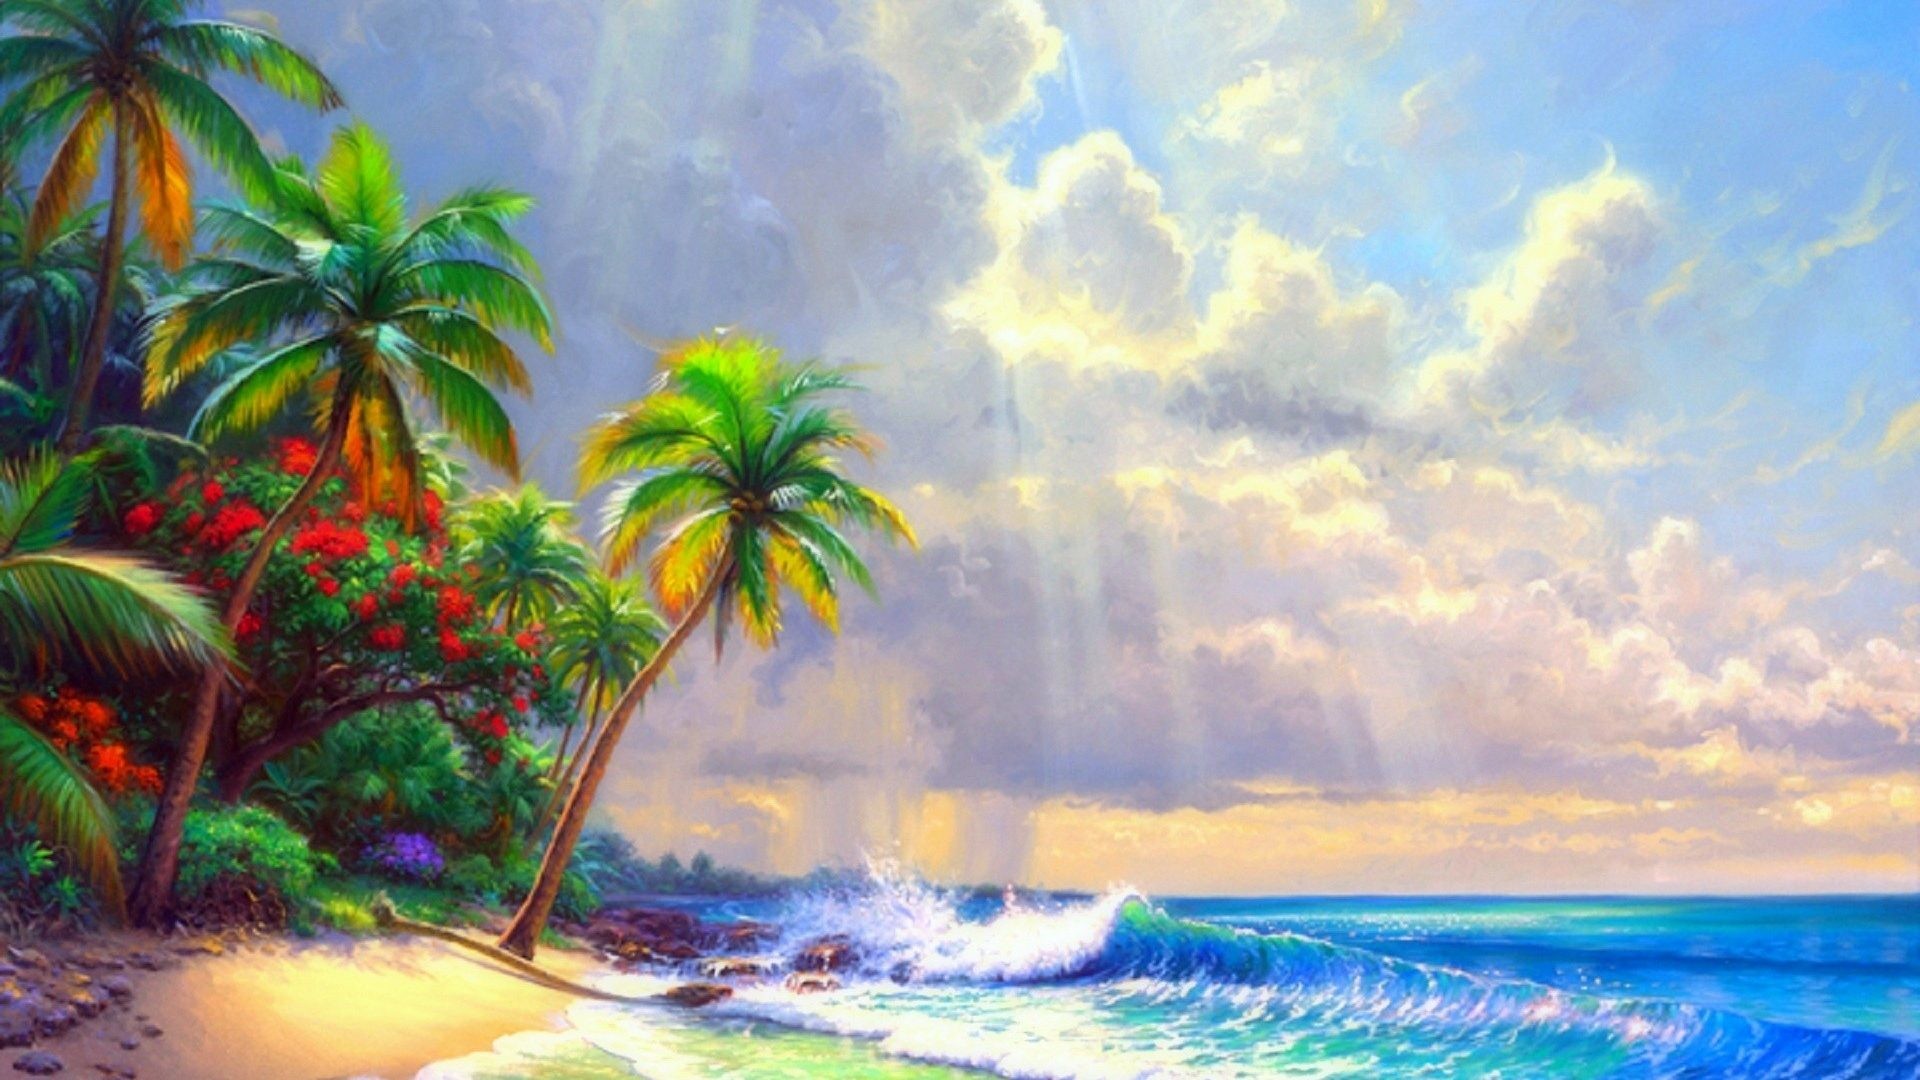 Panoramic Tag – Sea Paintings Getaways Sky Nature Clearing Bright Beaches Relaxing Creative Tropical Scenery Clouds